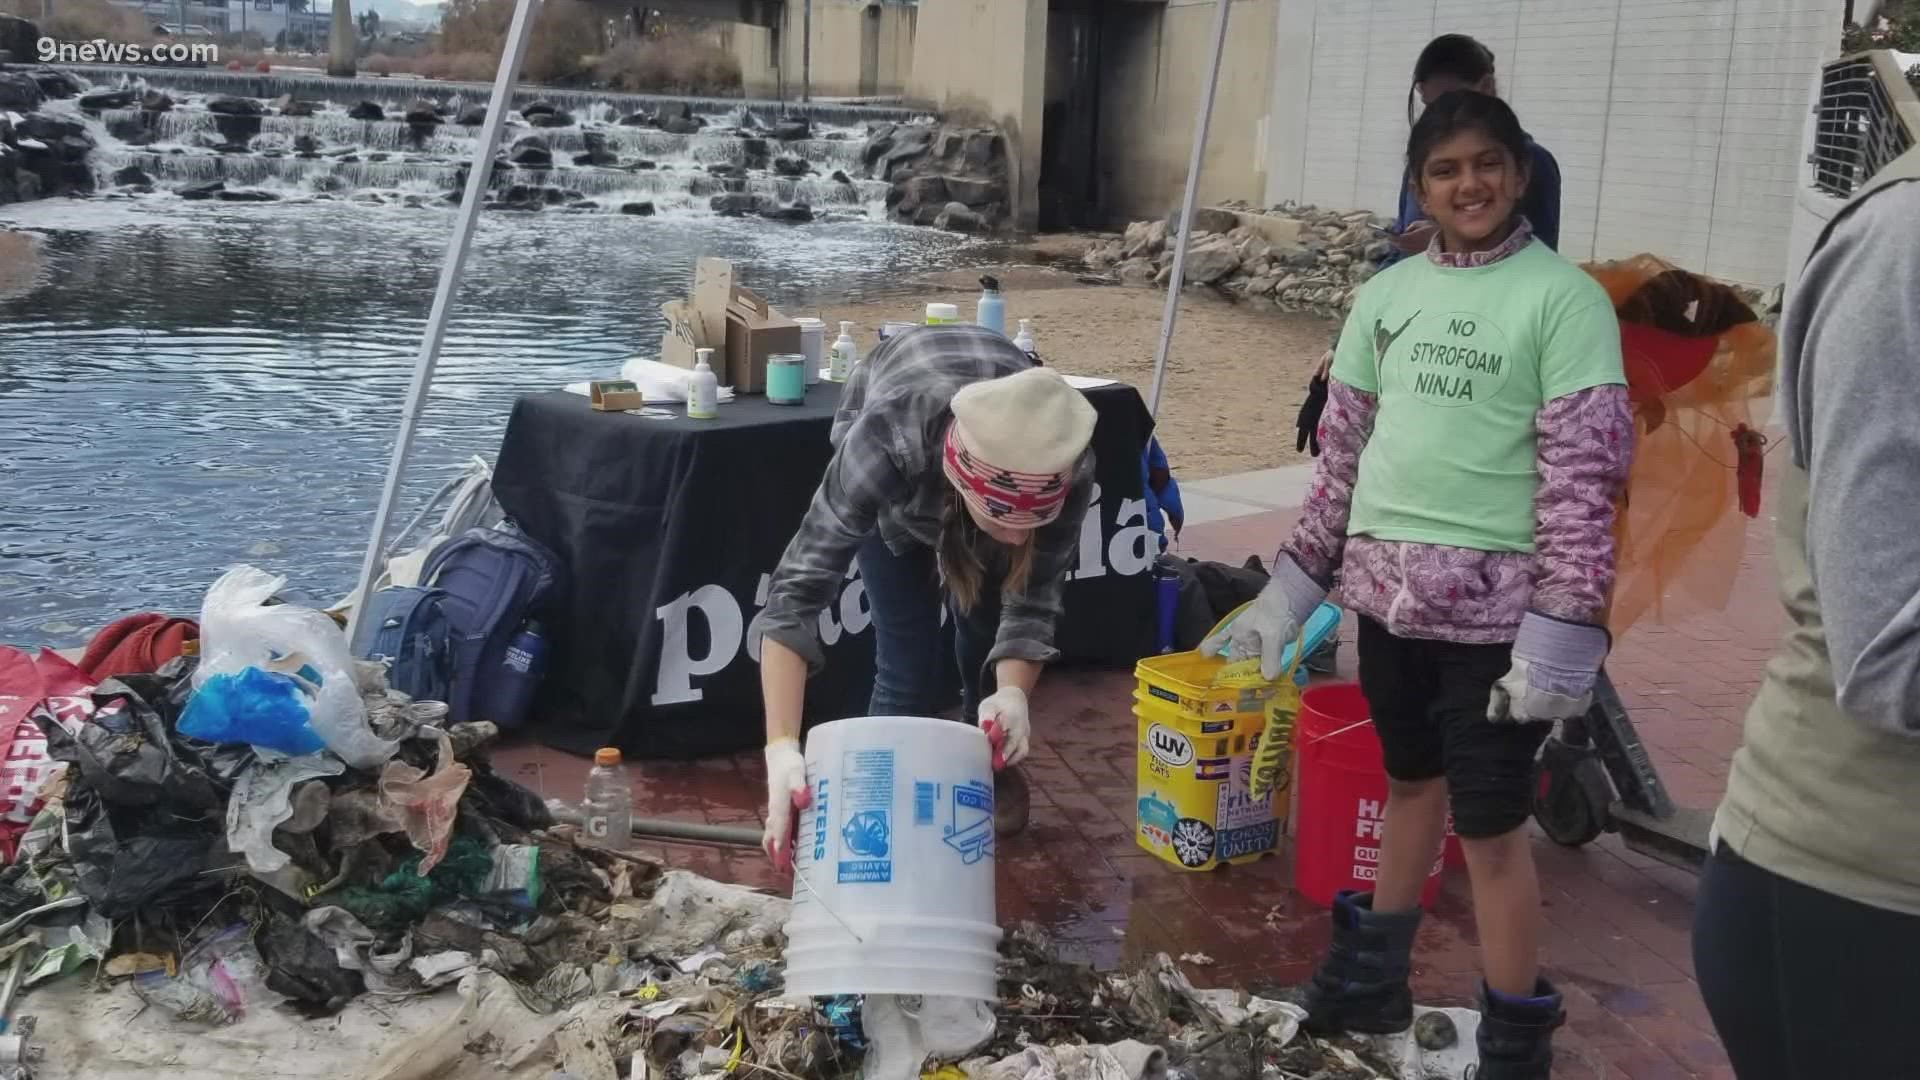 Madhvi Cittoor, a sixth-grade student in JeffCo is raising awareness about plastic pollution by attempting two recycling records and getting classmates involved.